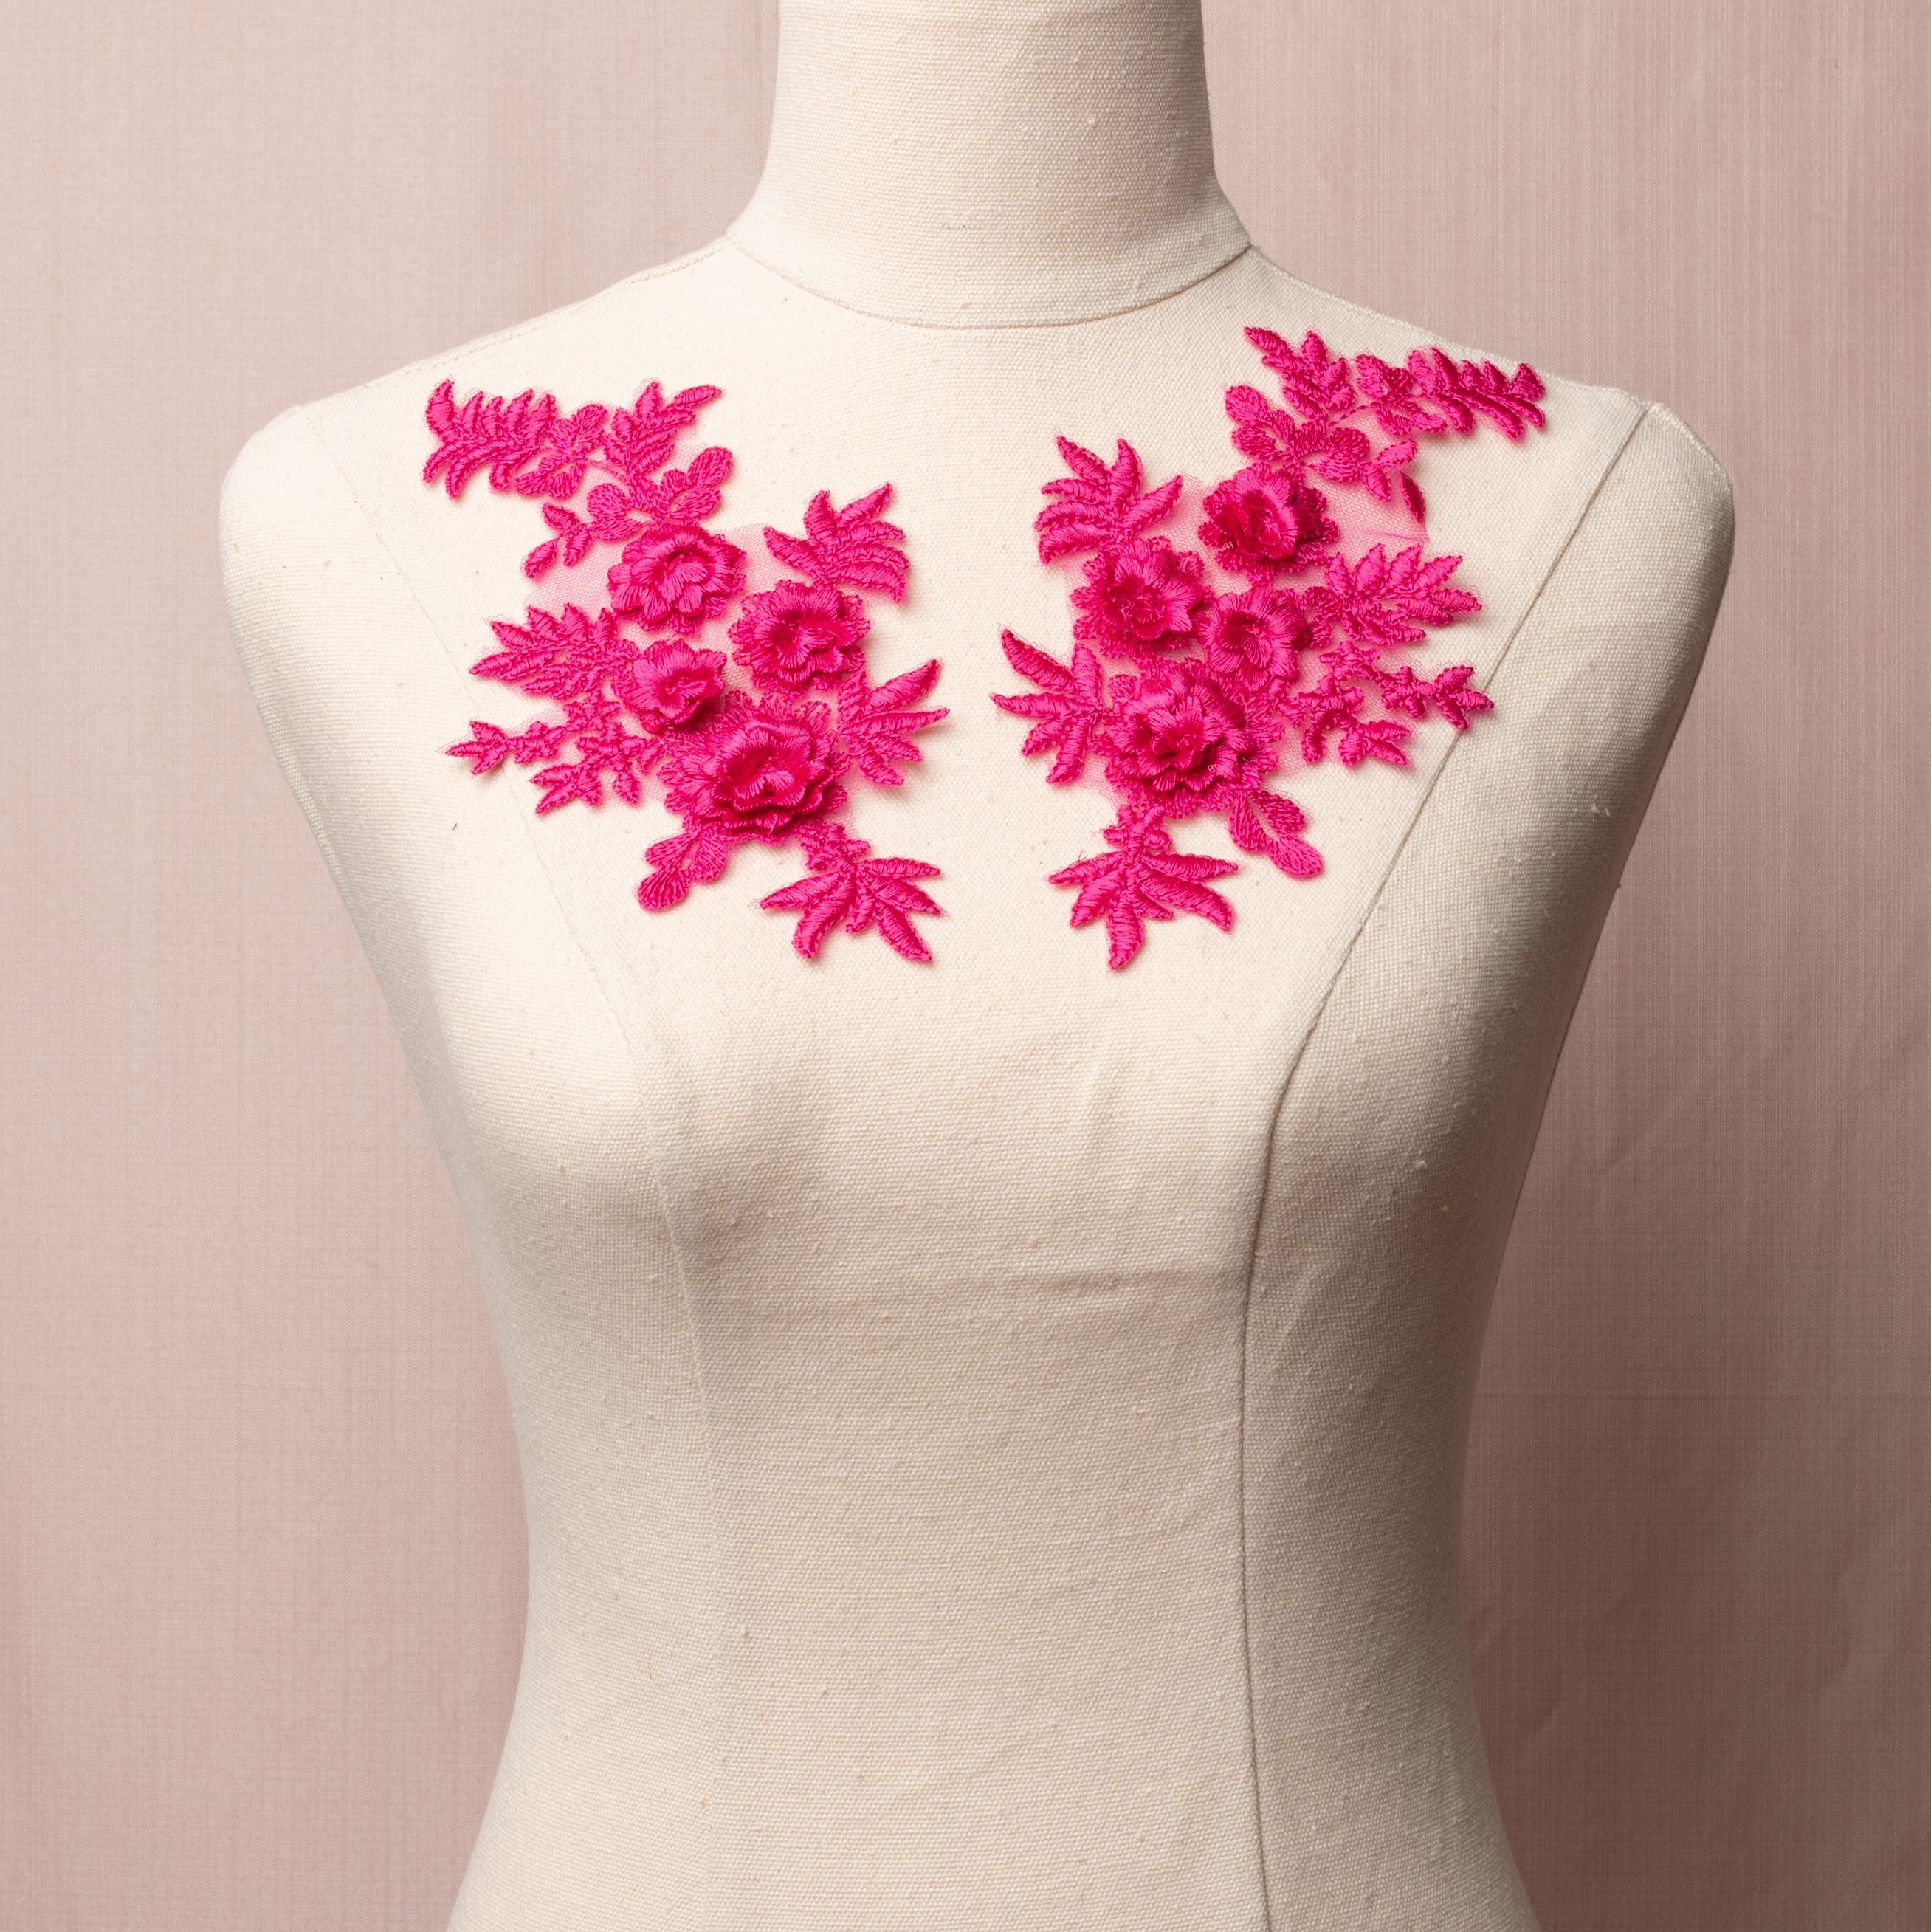 Embroidered fuchsia coloured applique pair with a floral design.  The appliques have 3D flowers and are  displayed on a mannequin.